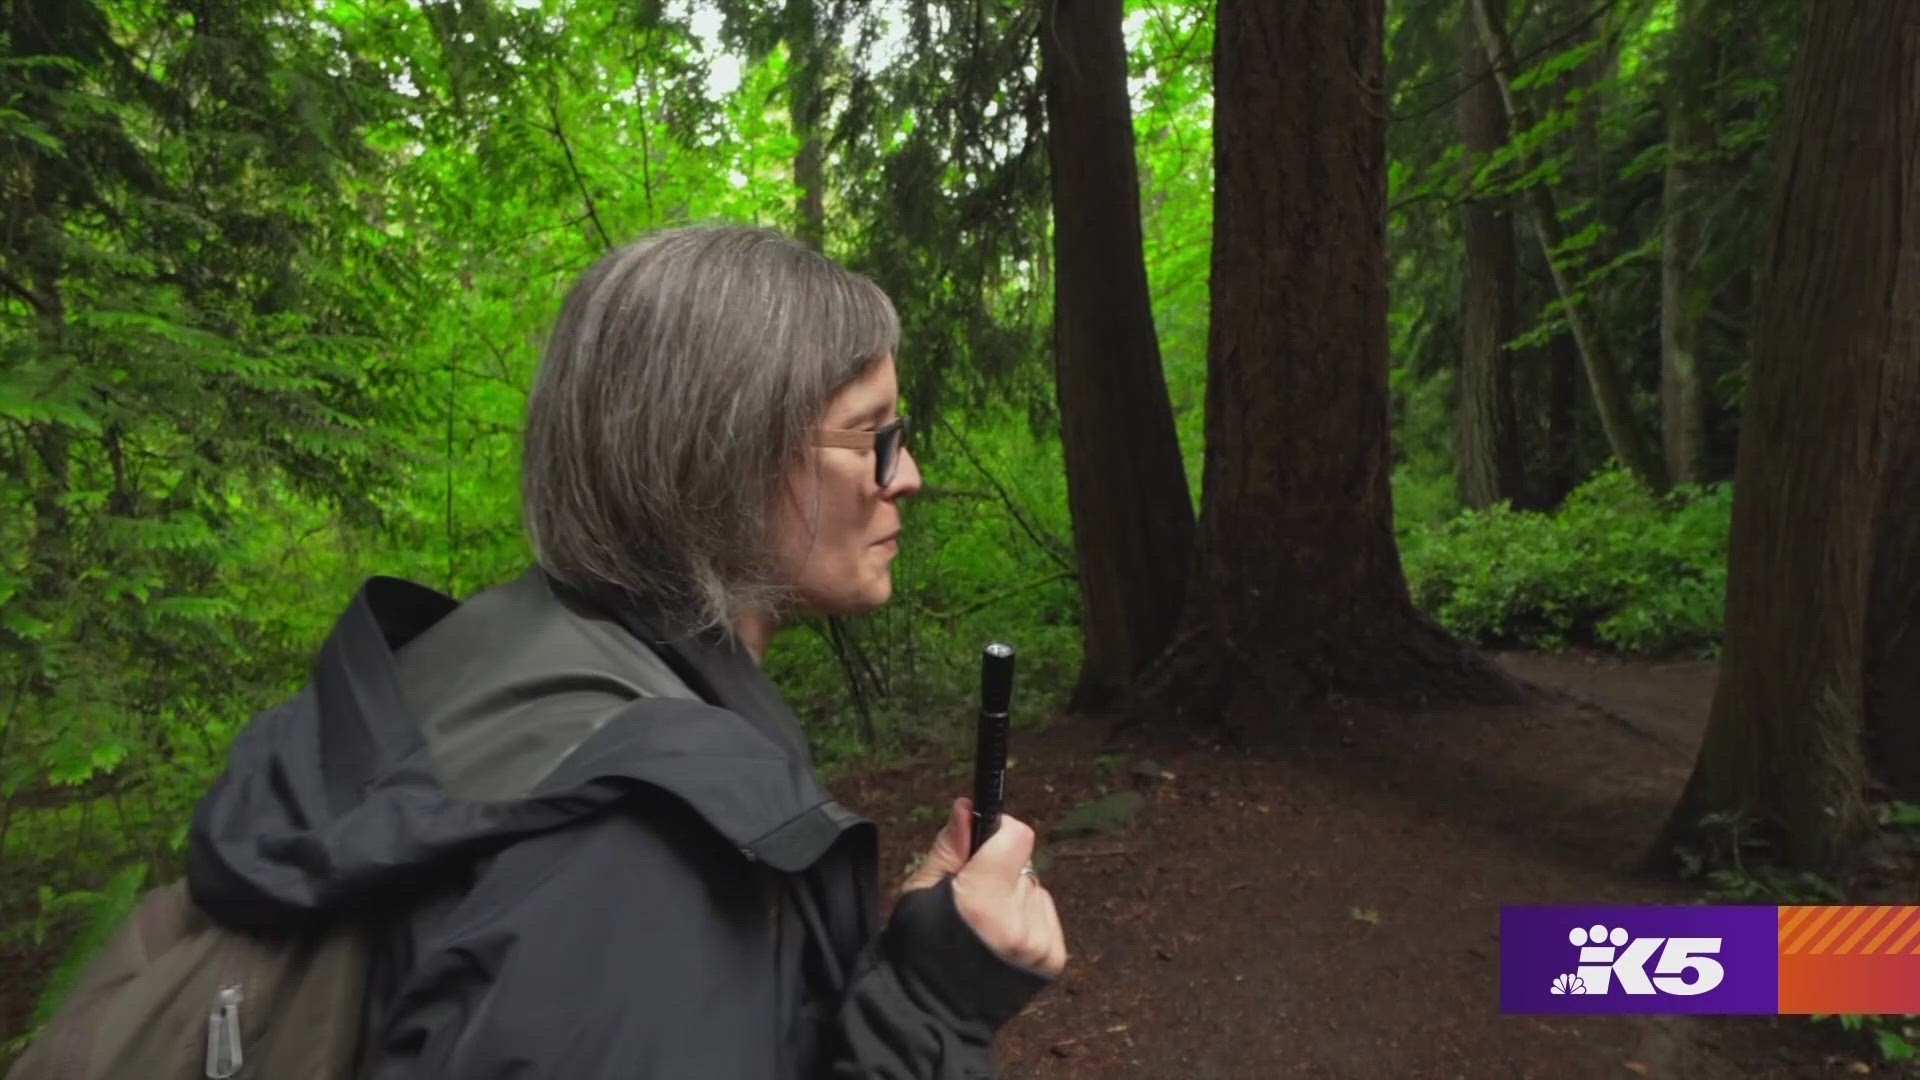 Projects and tips for discovering the natural wonders in your own backyard #k5evening